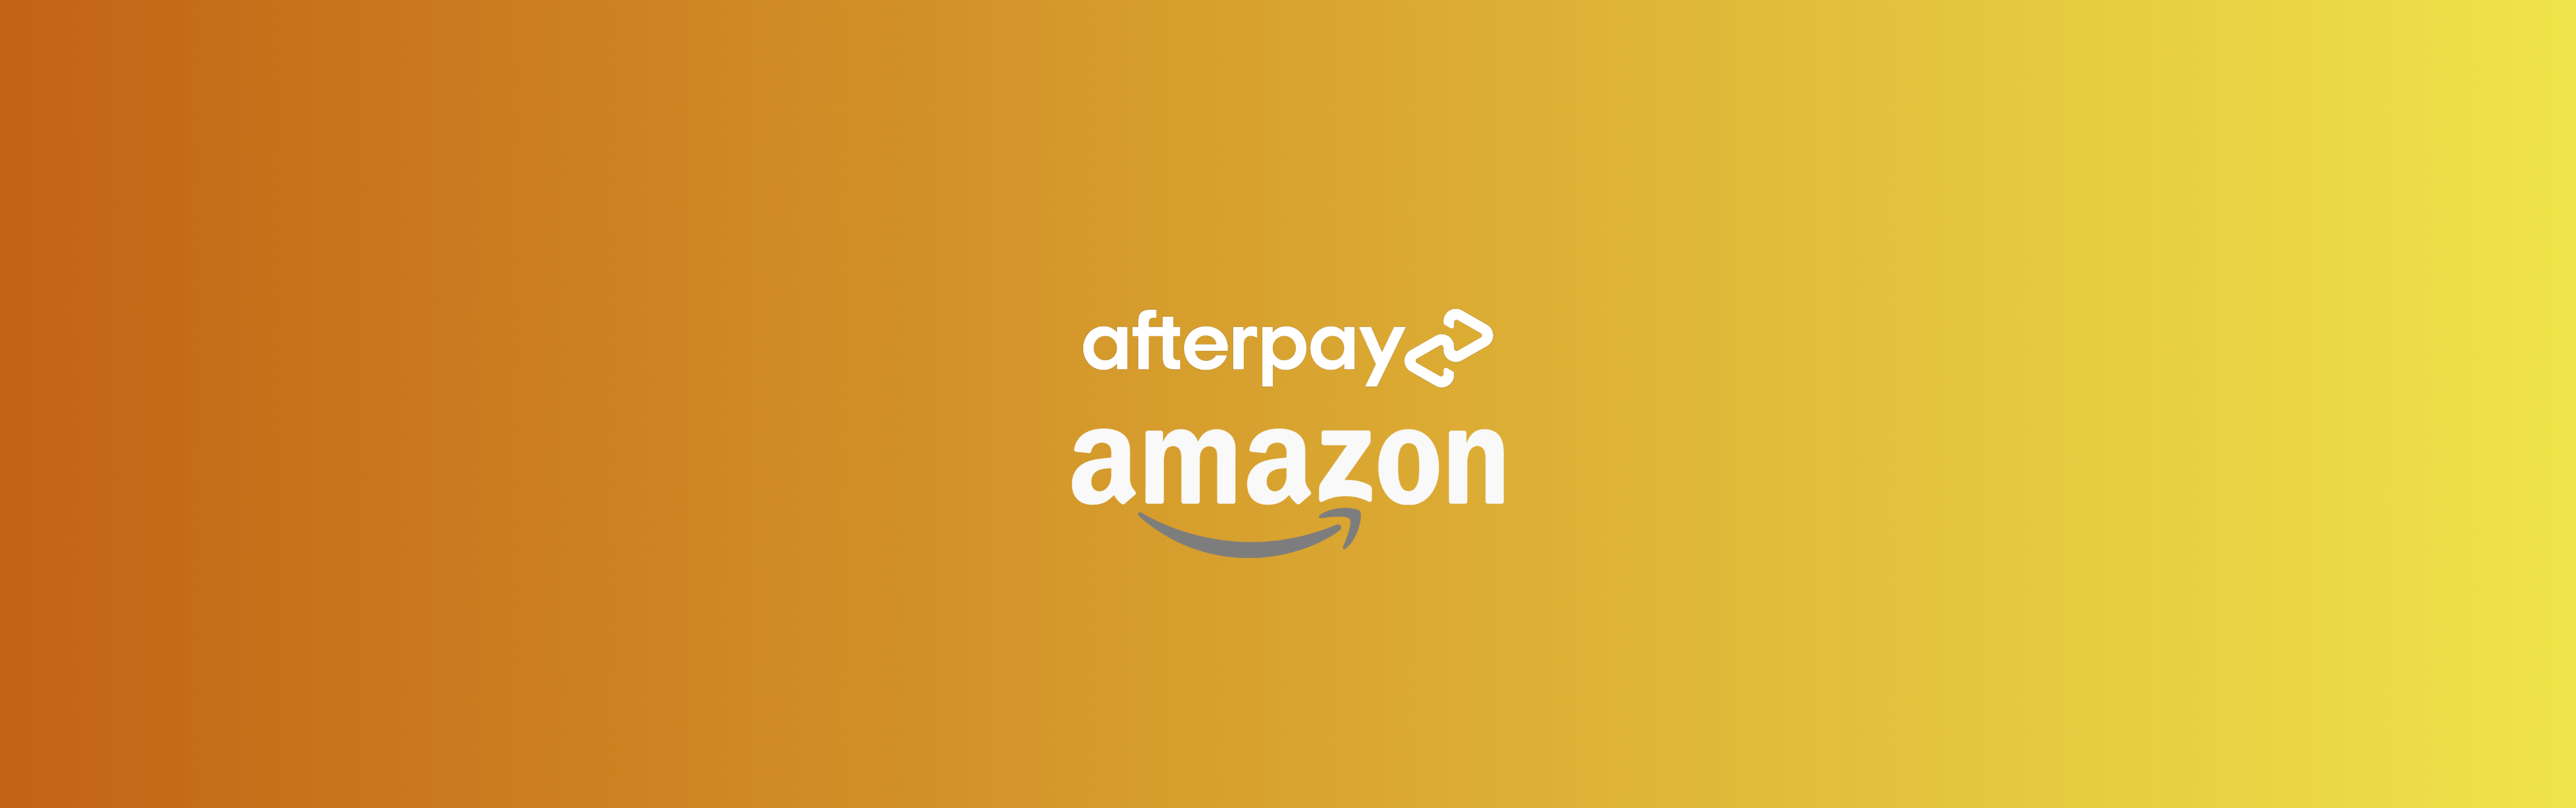 How to Use Afterpay on Amazon: Can You Use Afterpay on Amazon [A Using Afterpay Guide]